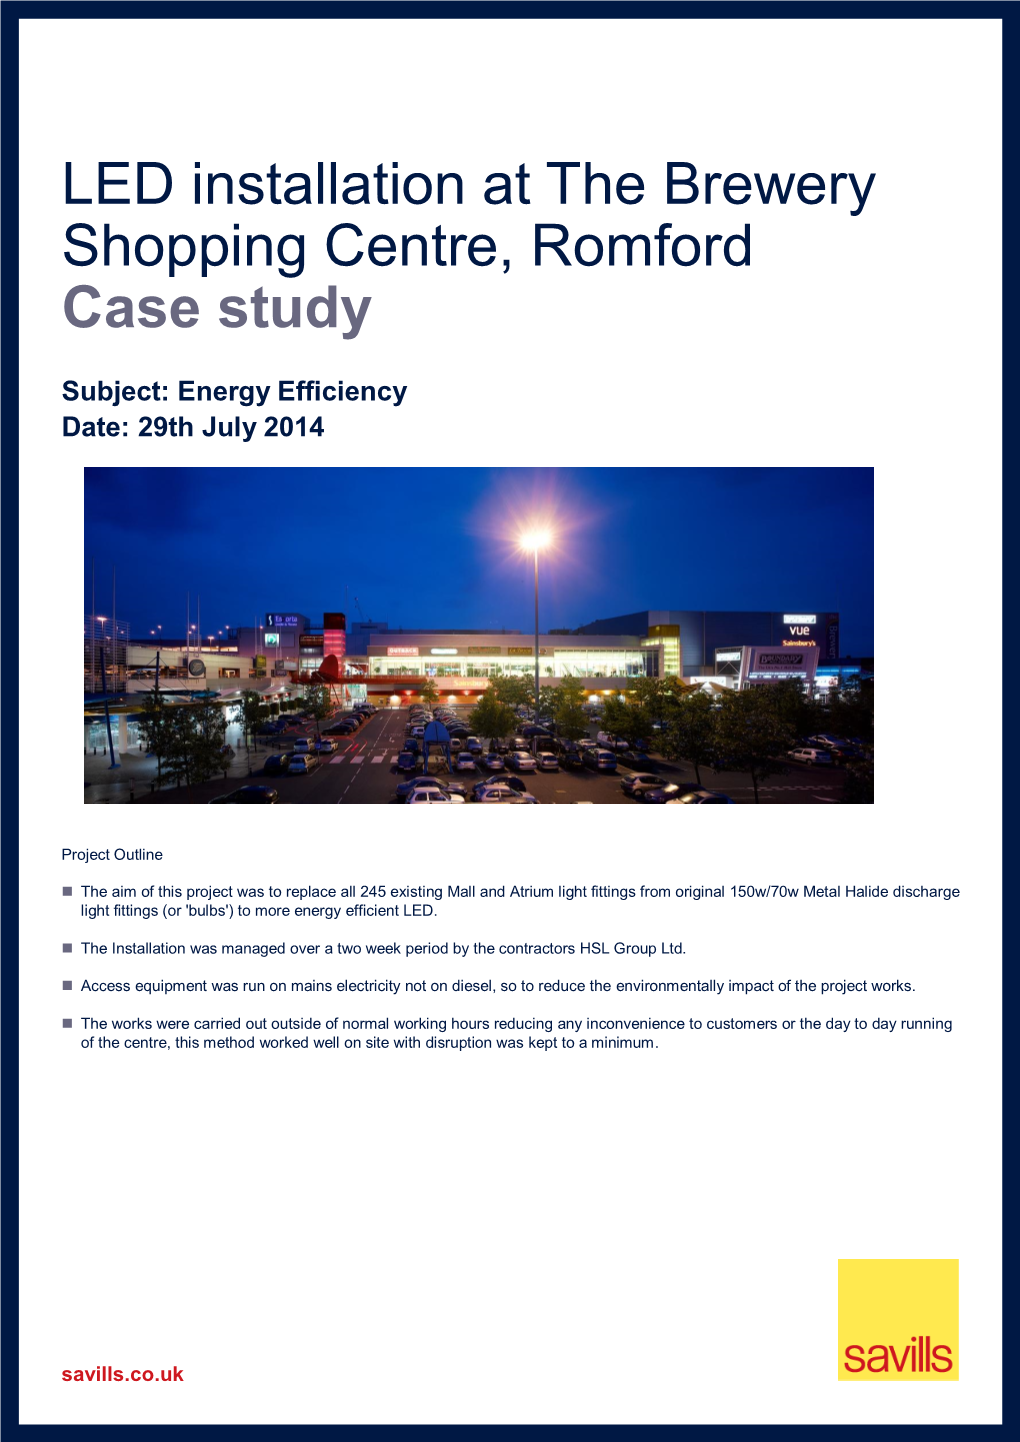 LED Installation at the Brewery Shopping Centre, Romford Case Study